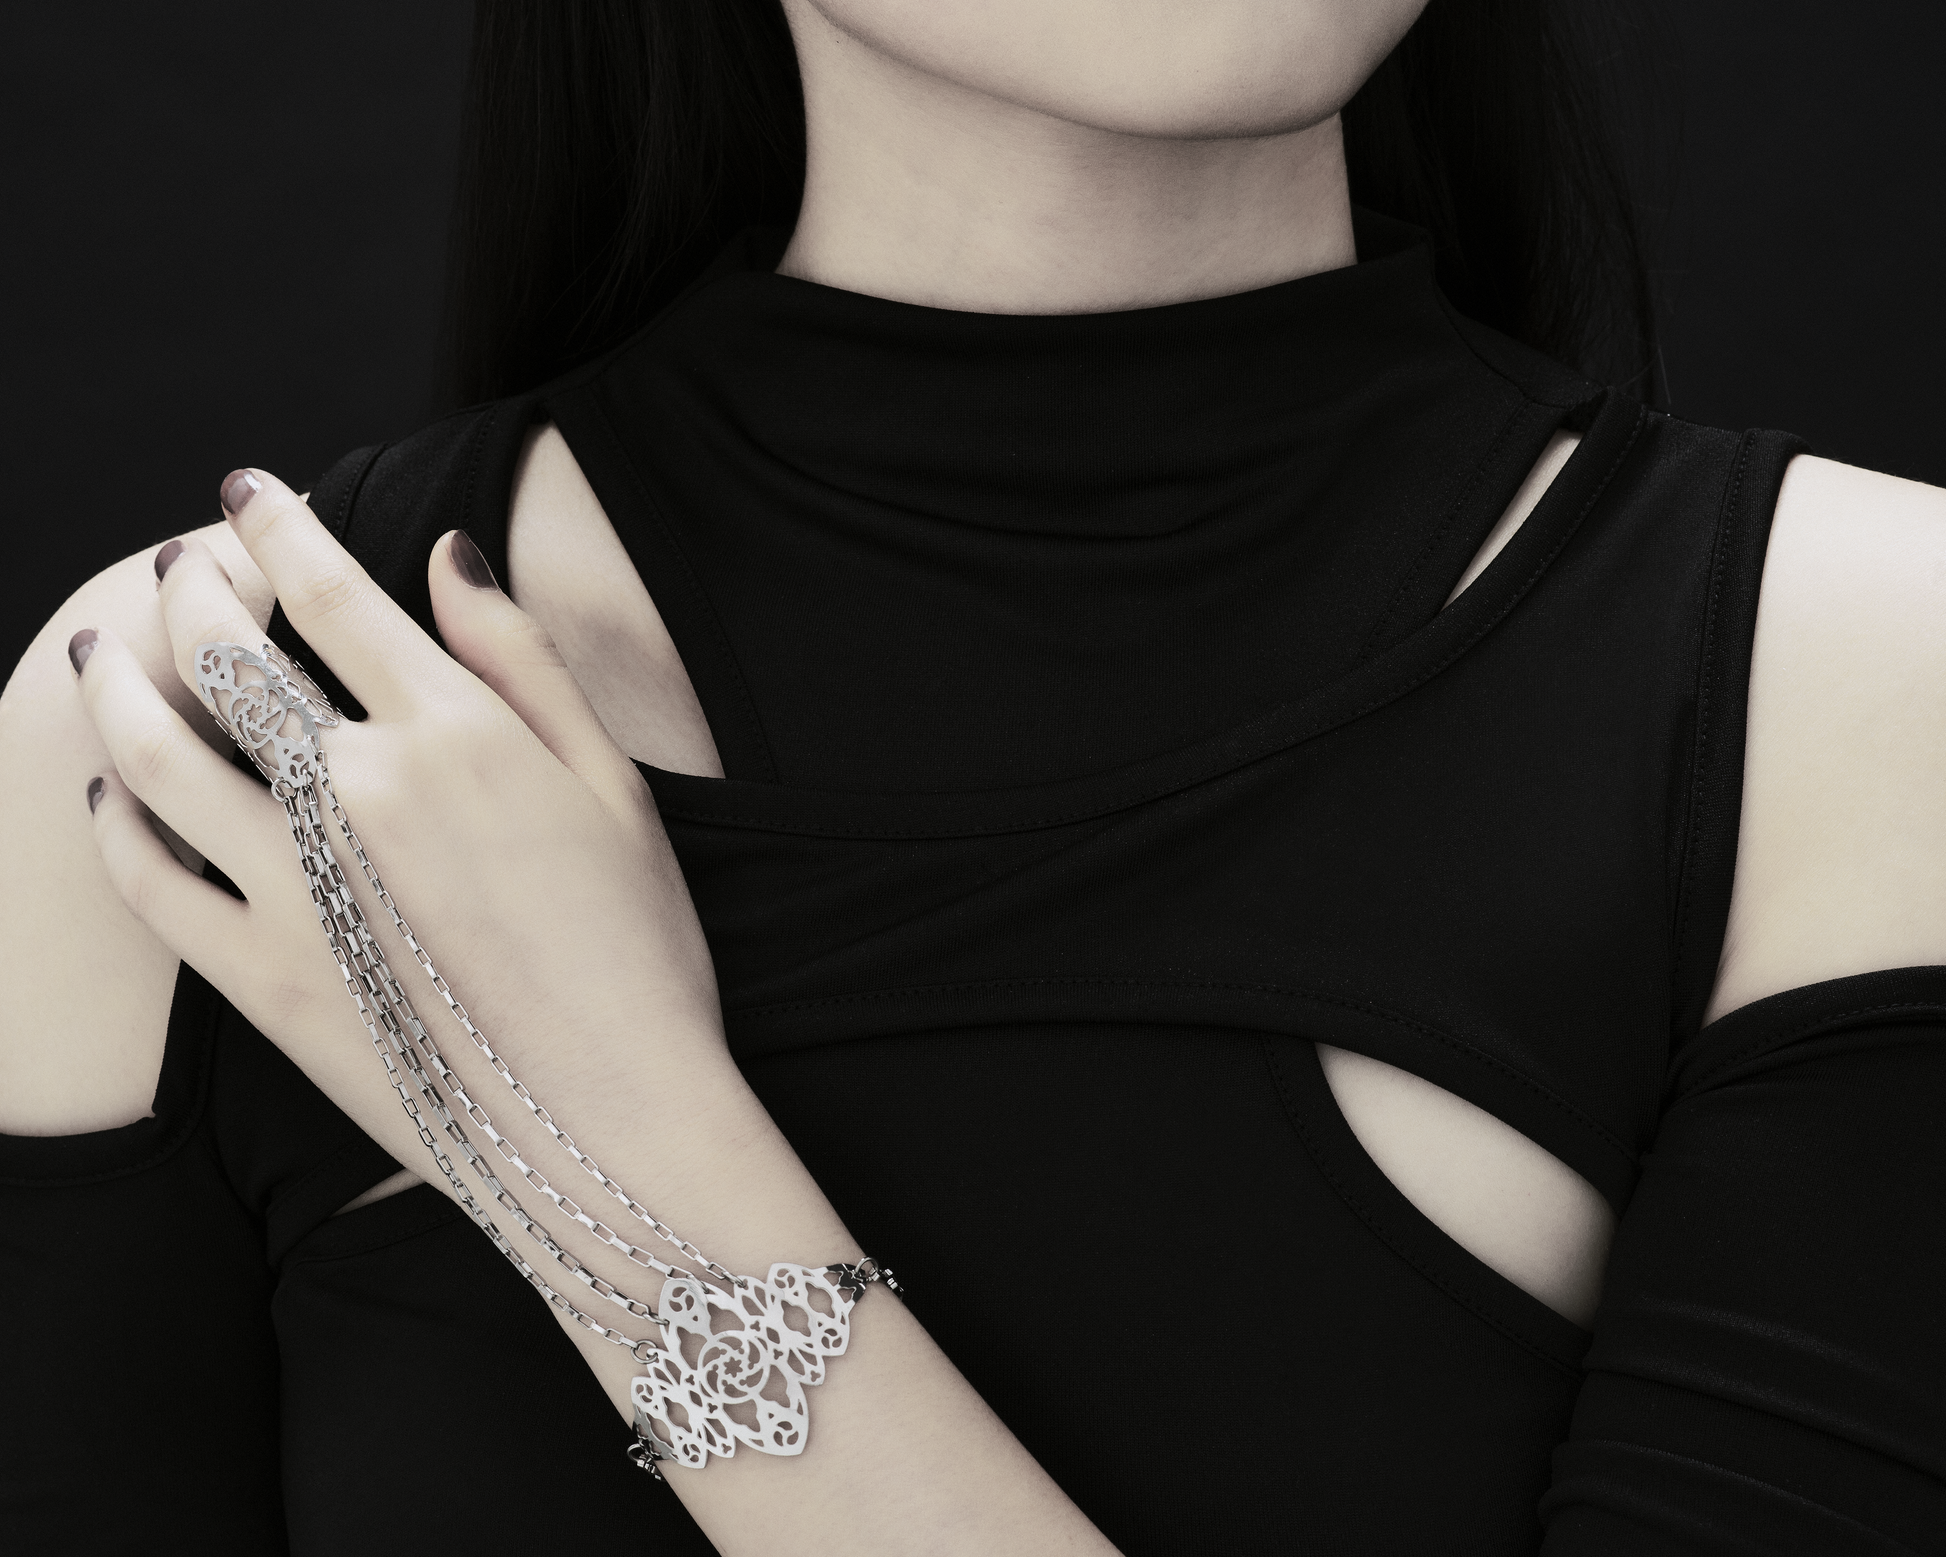 A poised hand adorned with a Myril Jewels hand chain graces the frame. Intricate filigree inspired by gothic arches drapes over the wrist, linking to a filigree ring, exemplifying the brand's fusion of dark elegance and architectural grace, perfect for the gothic-avantgarde enthusiast's collection.